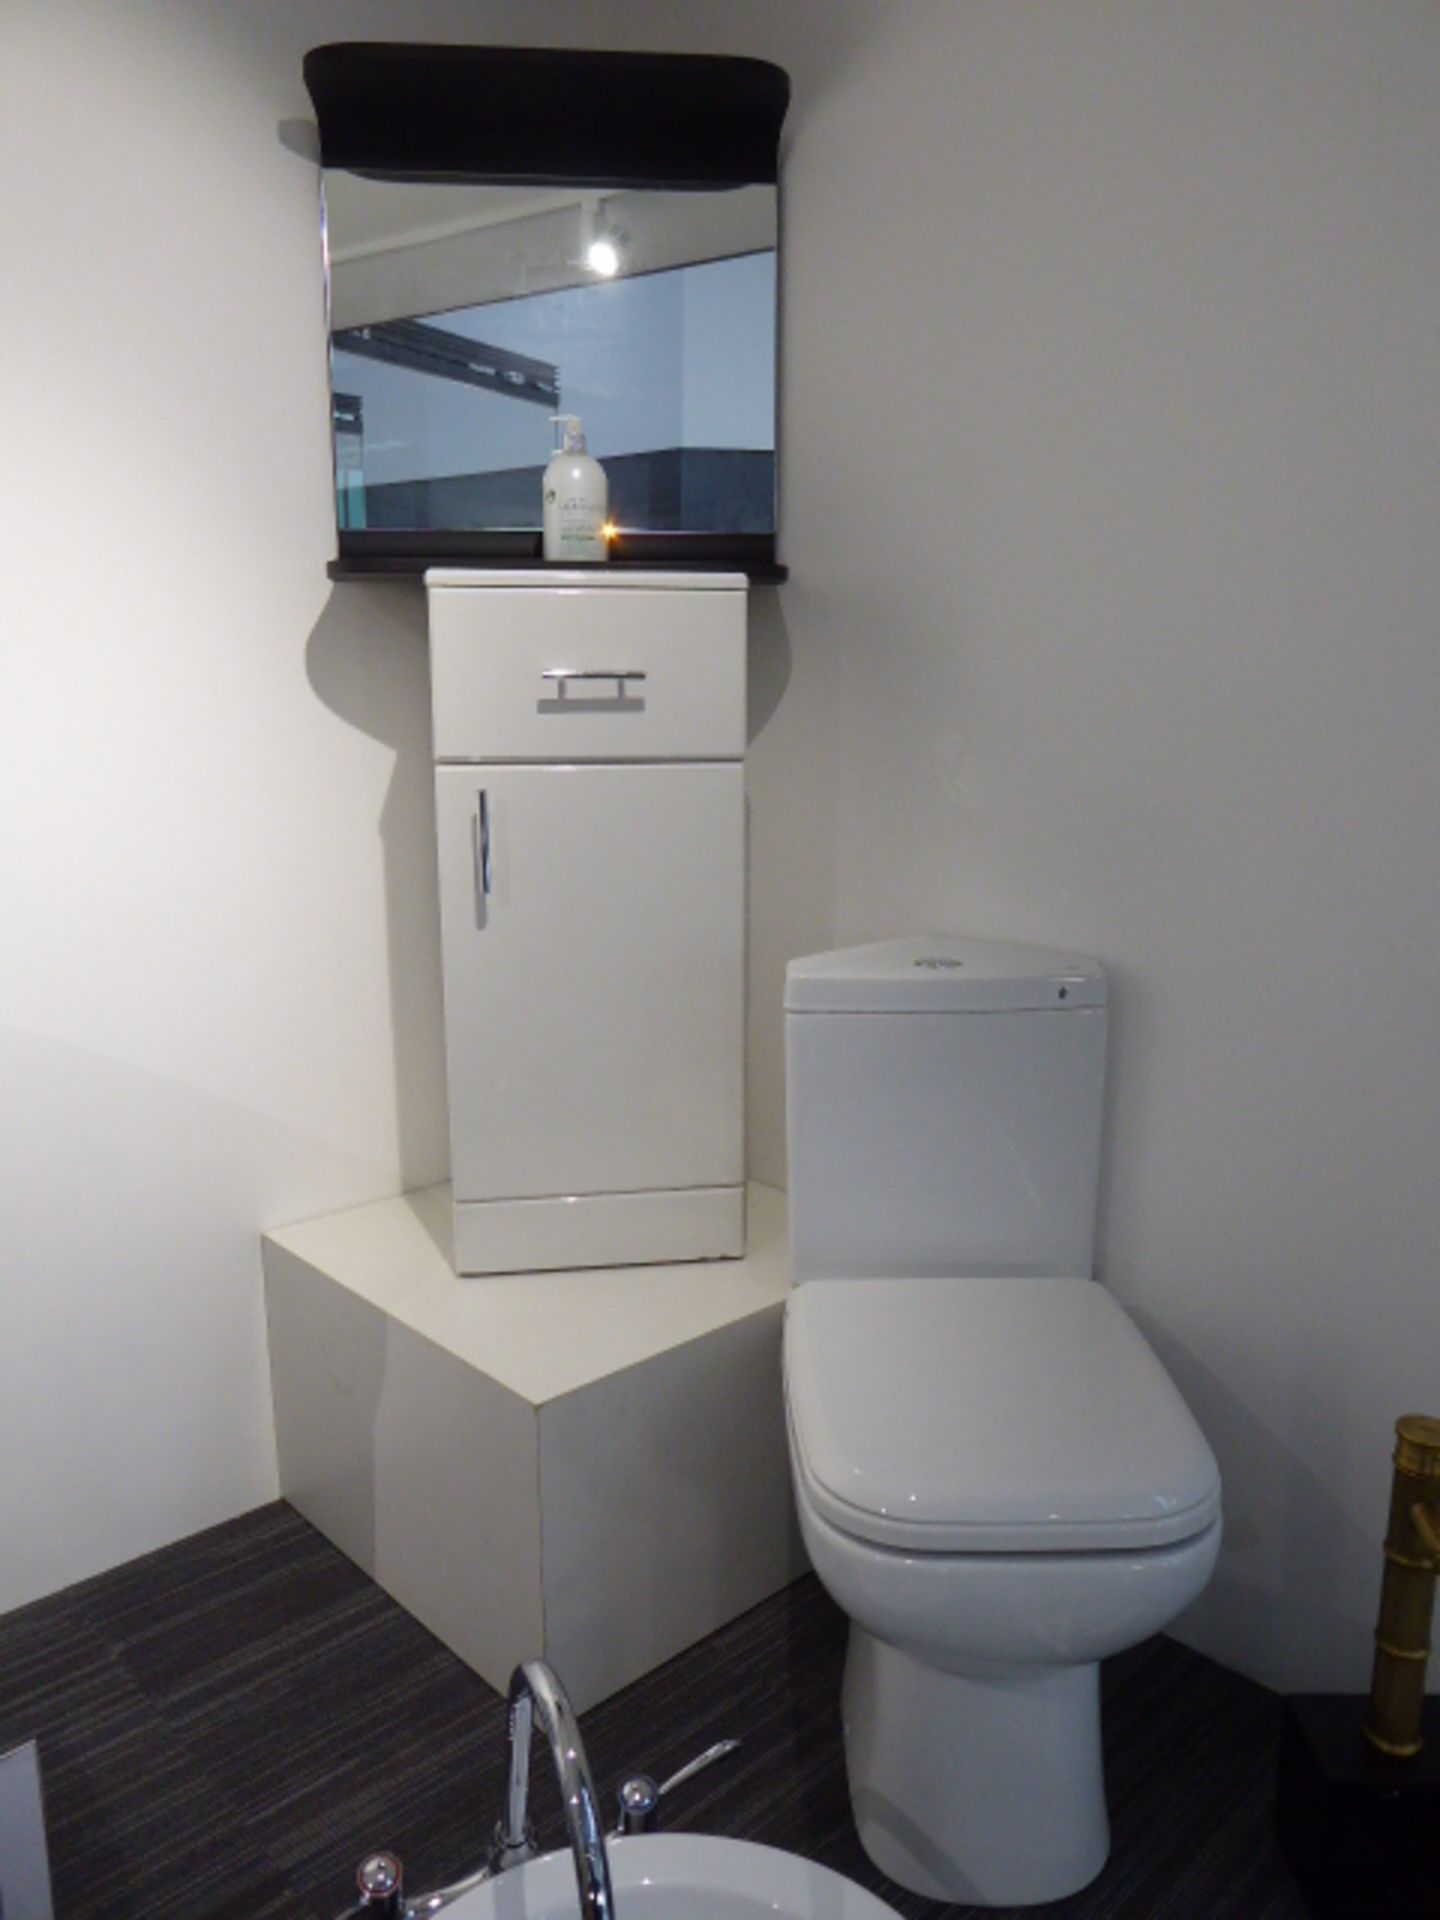 RAK Ceramics corner fitting toilet pan, cistern and seat together with a single drawer vanity - Image 3 of 3